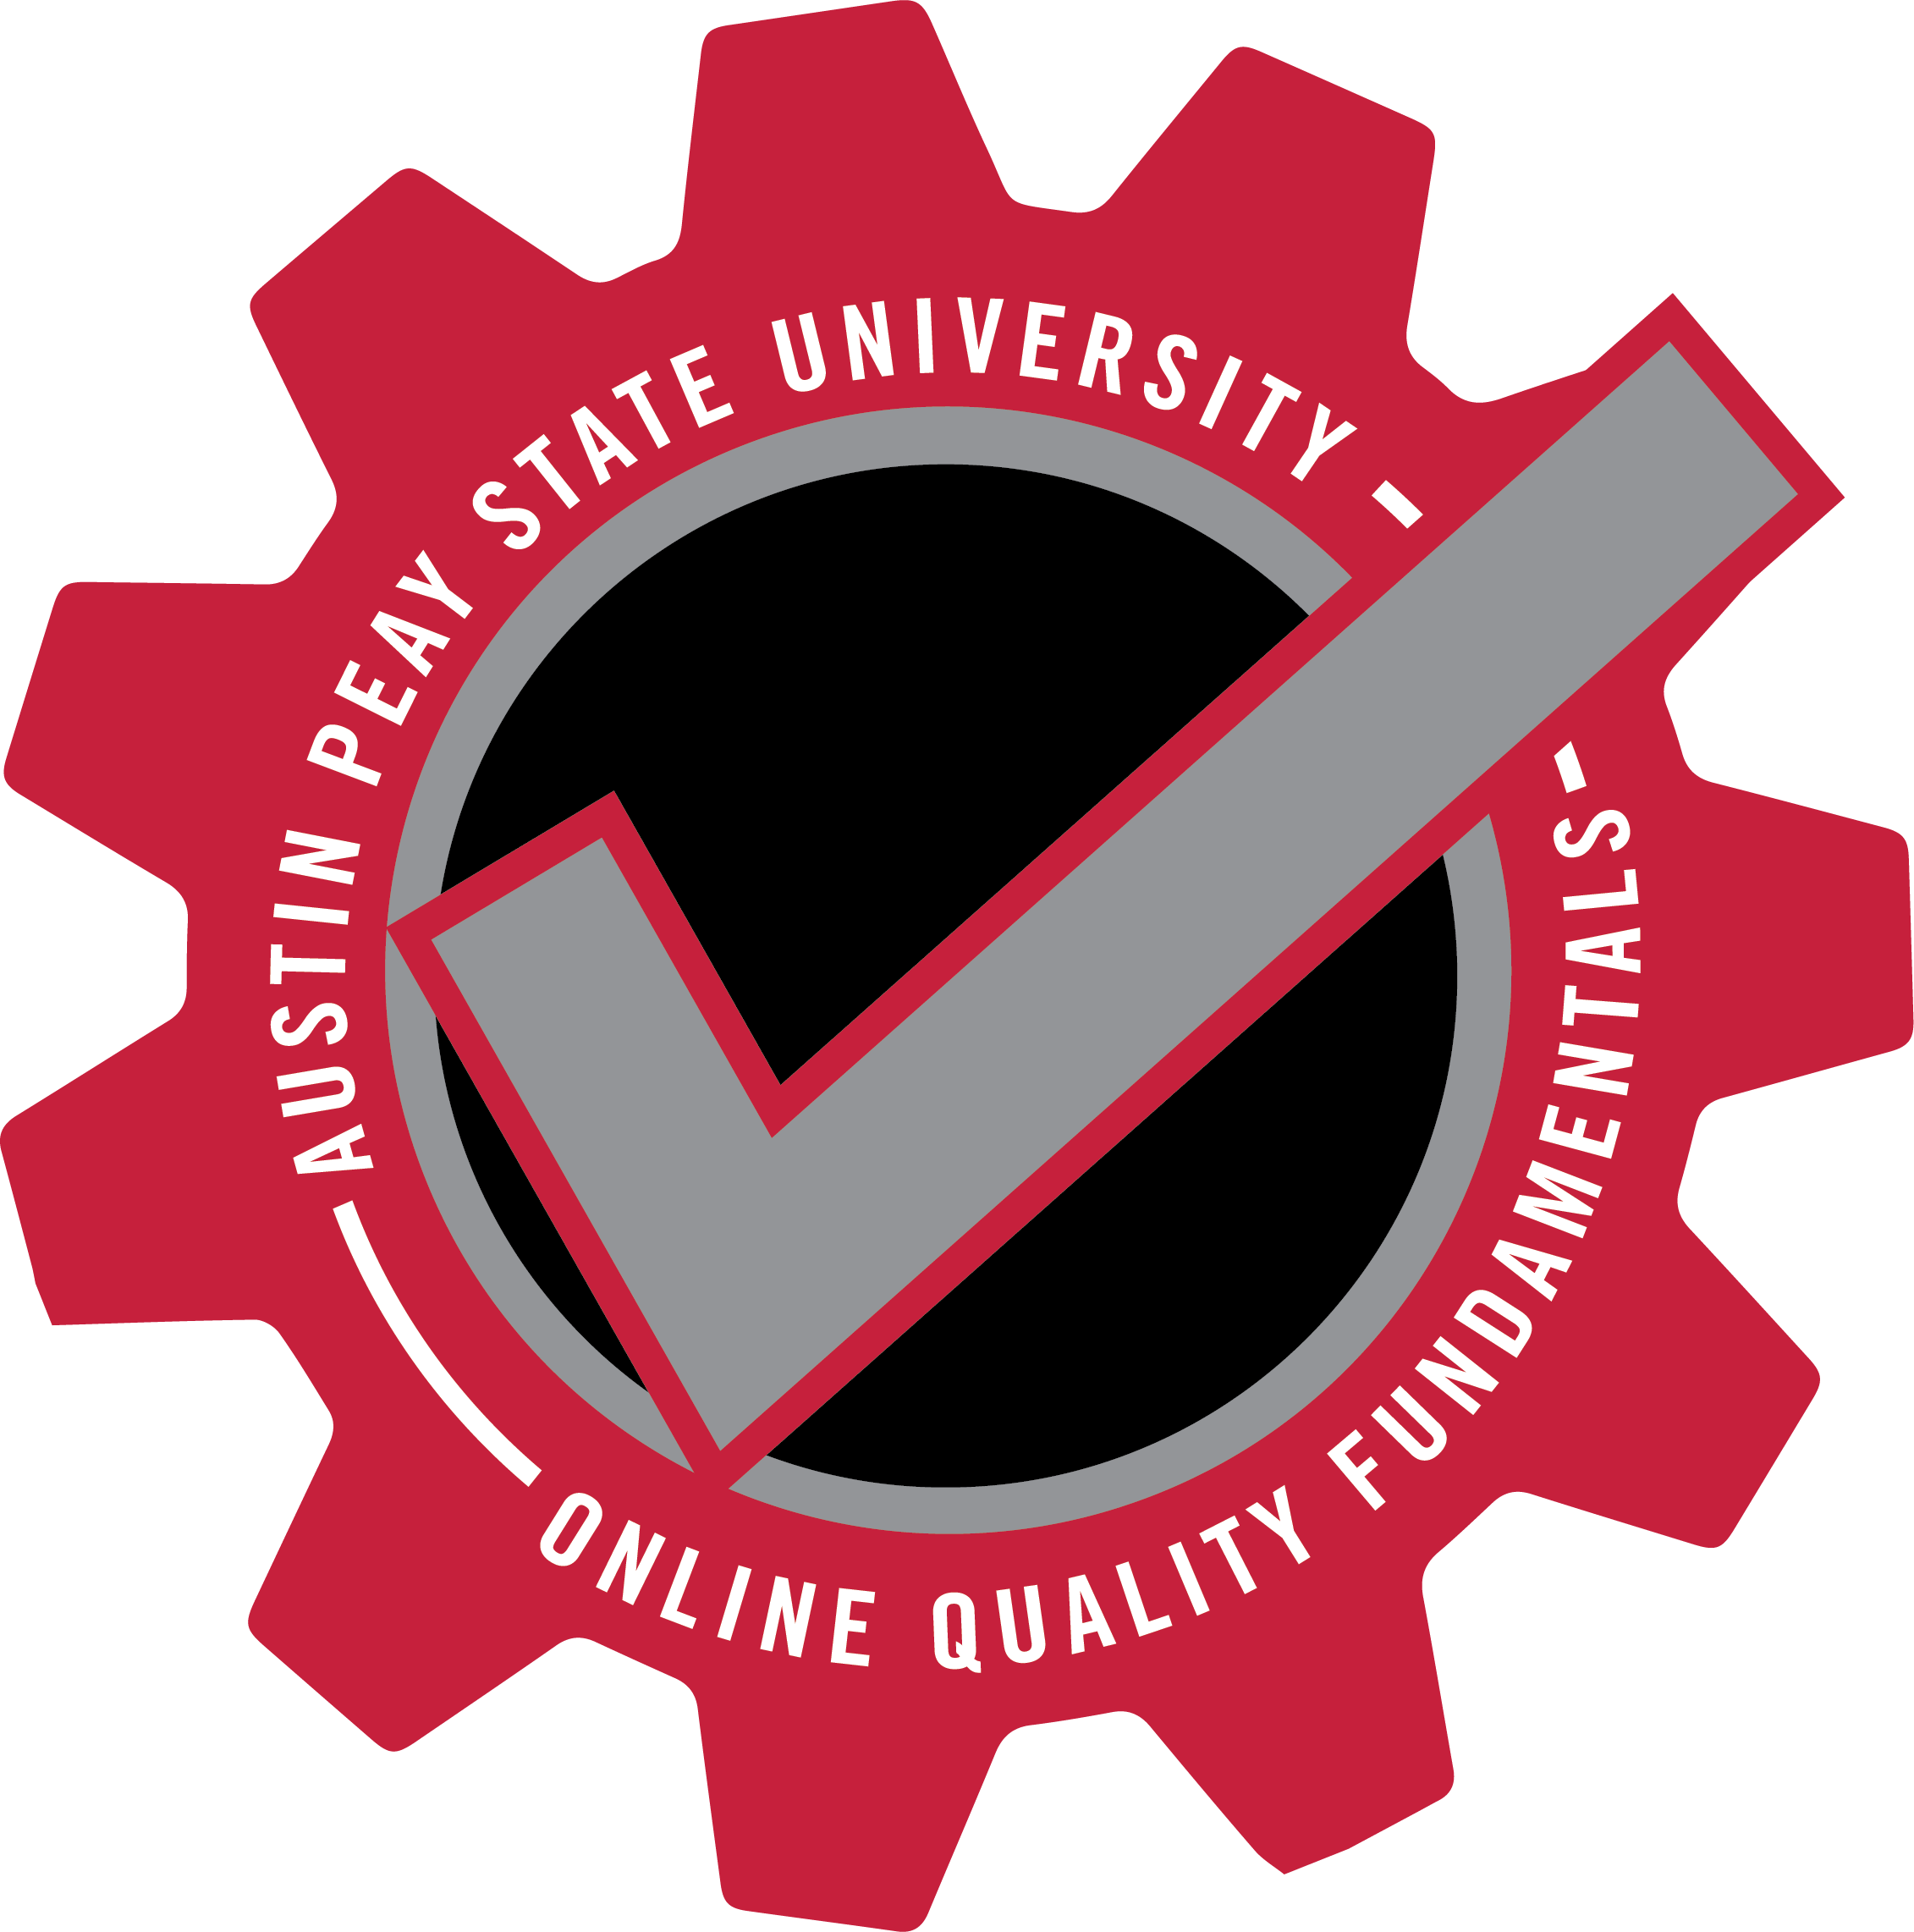 The text “Austin Peay State University Quality Online Fundamentals” is displayed in red gear with a grey checkmark outlined in red through the center.